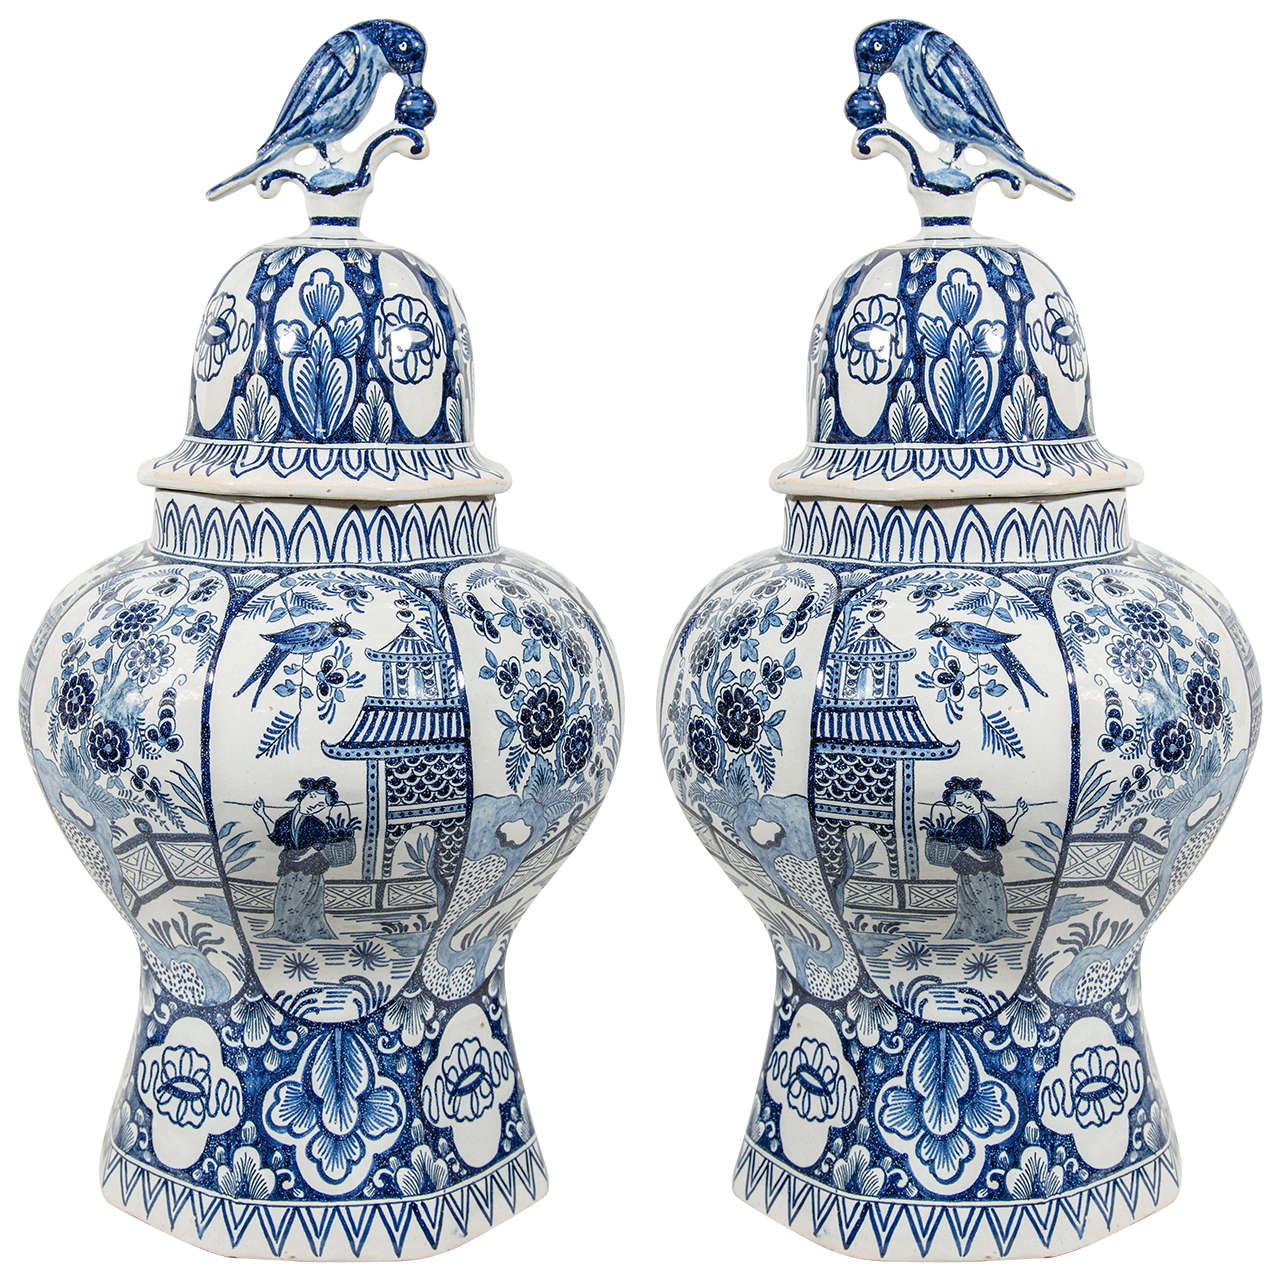 Pair of Dutch Delft Blue and White Covered Vases